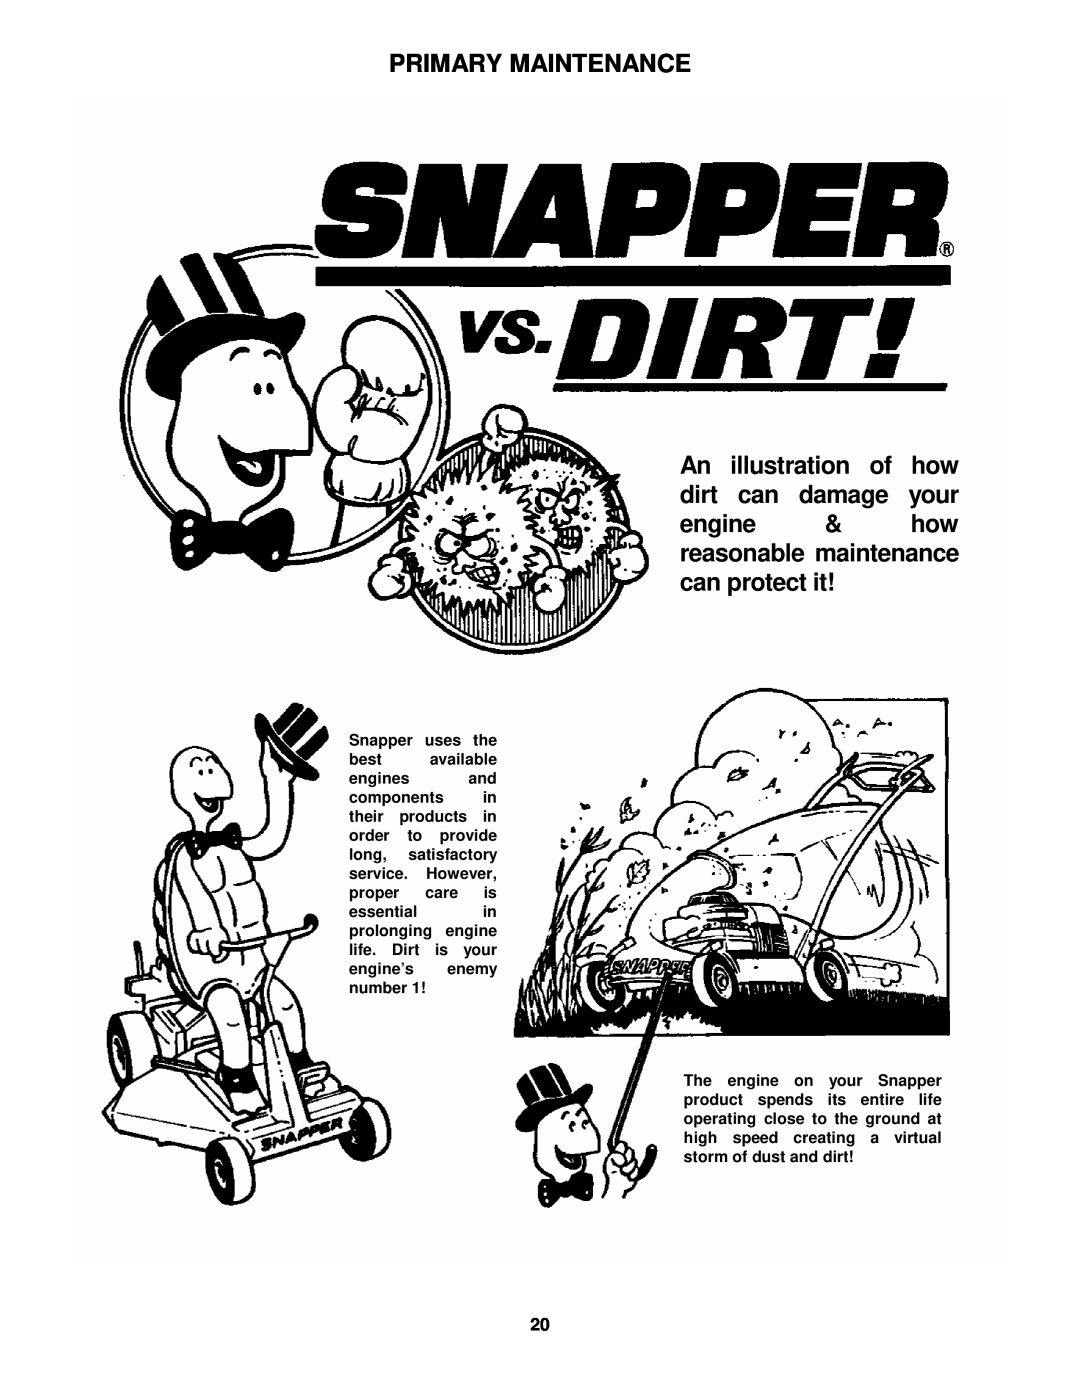 Snapper EFRP216516TV important safety instructions Primary Maintenance, An illustration of how dirt can damage your 